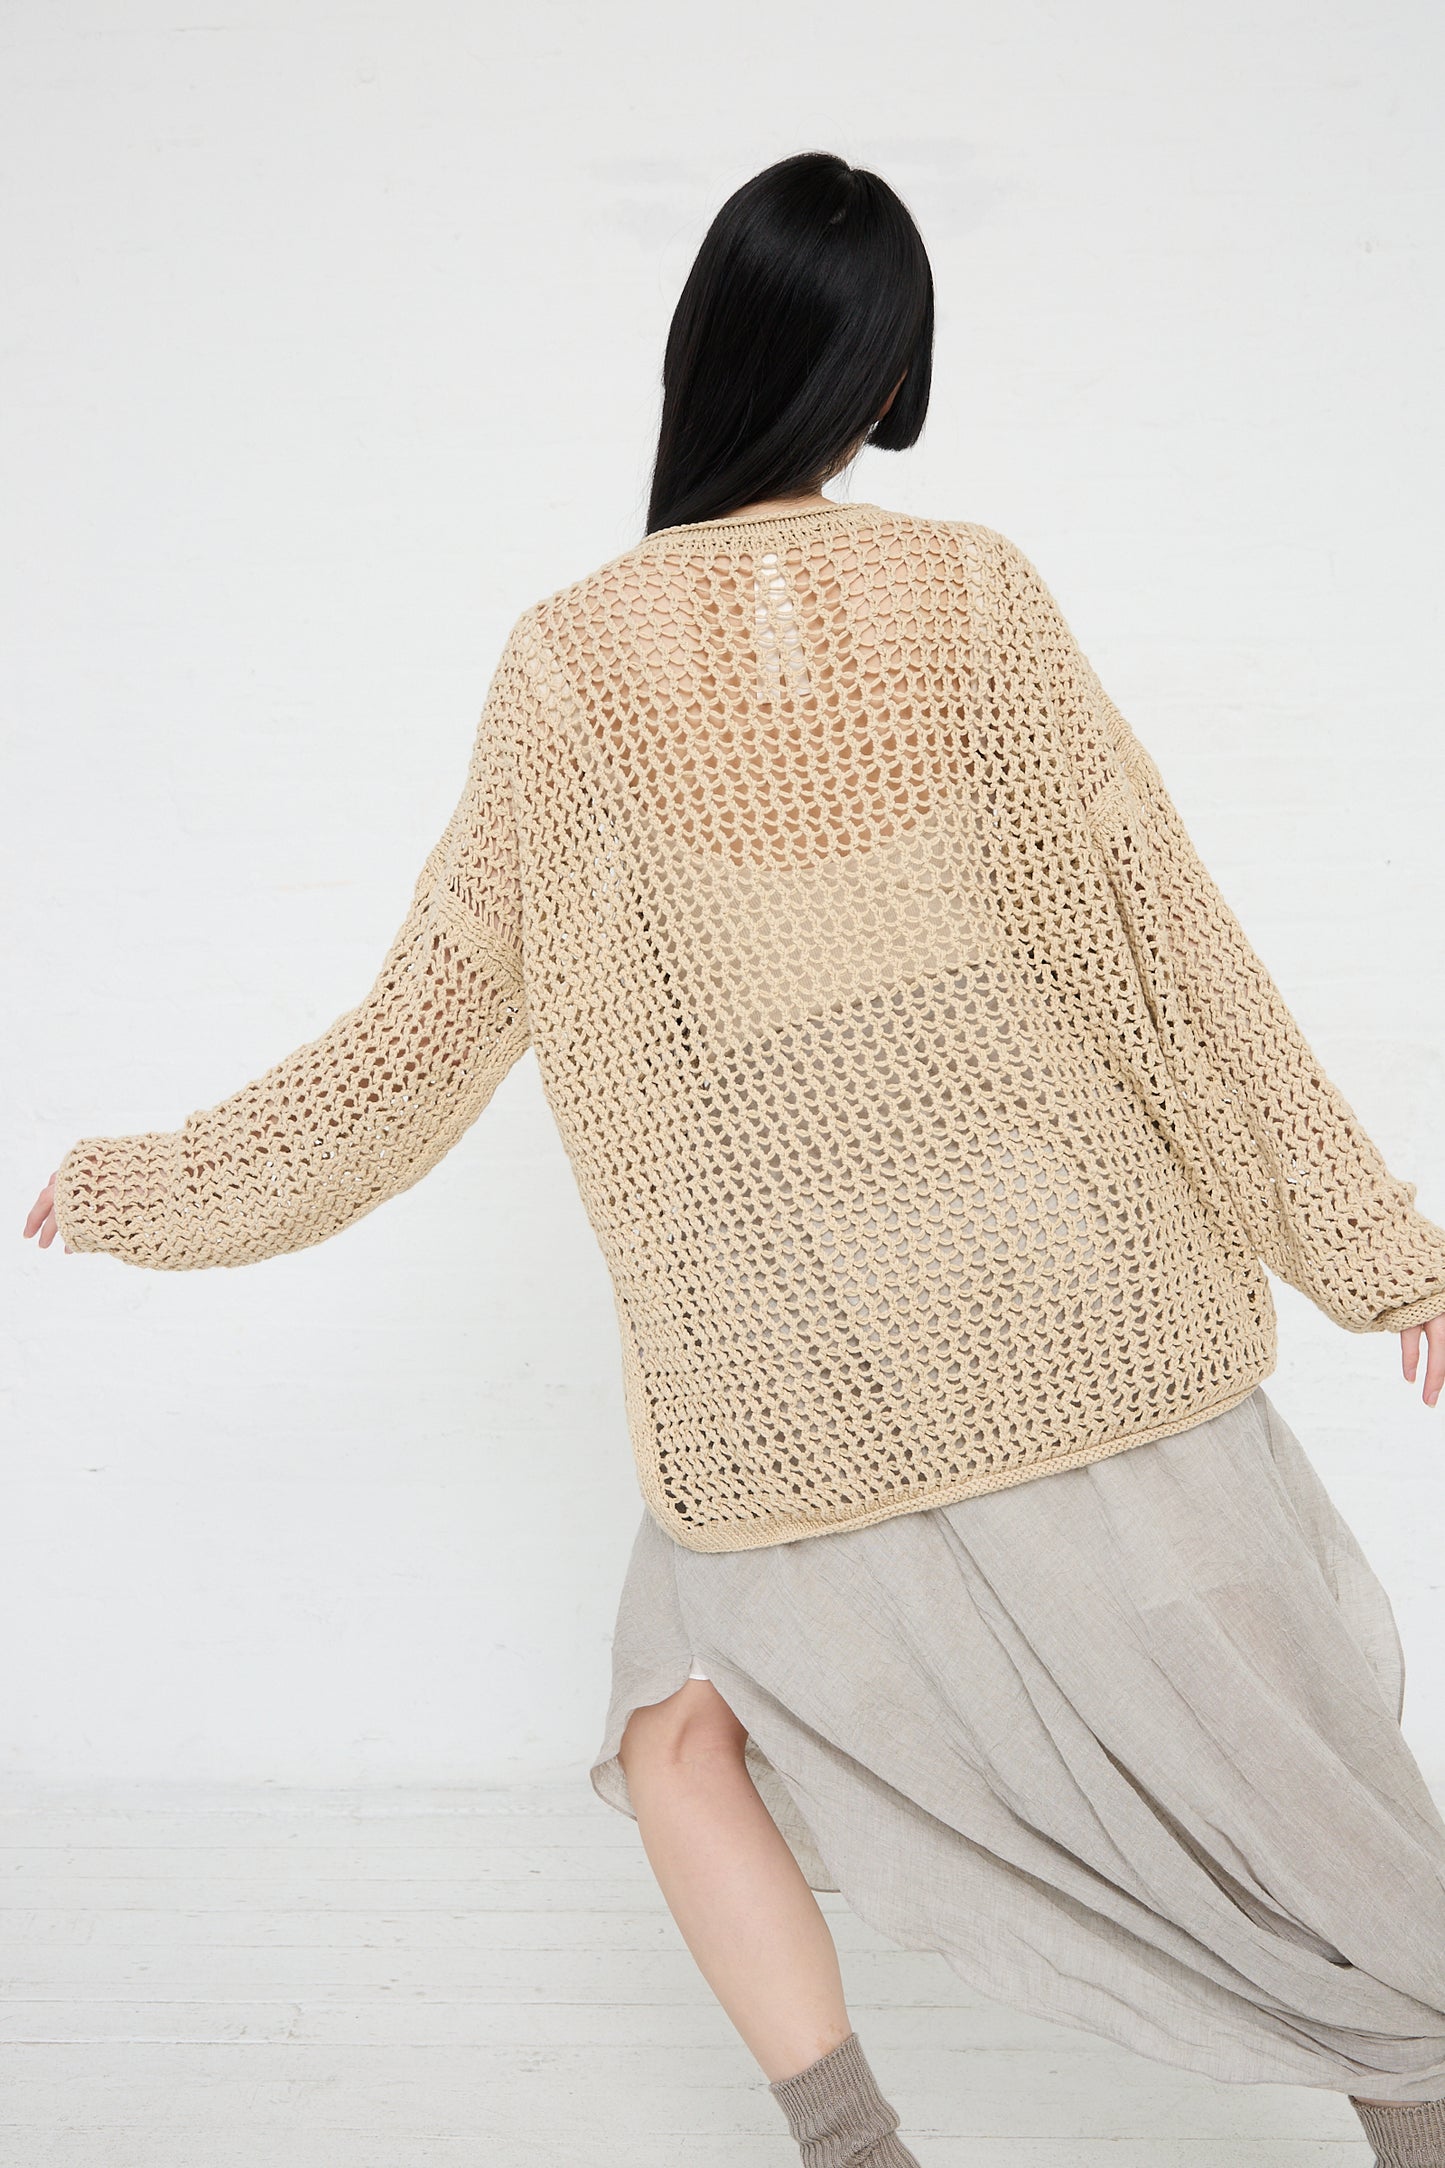 Woman posing with her back to the camera, wearing a beige oversized Lauren Manoogian Big Net Pullover in Jute and a flowing skirt made from sustainable knitwear.